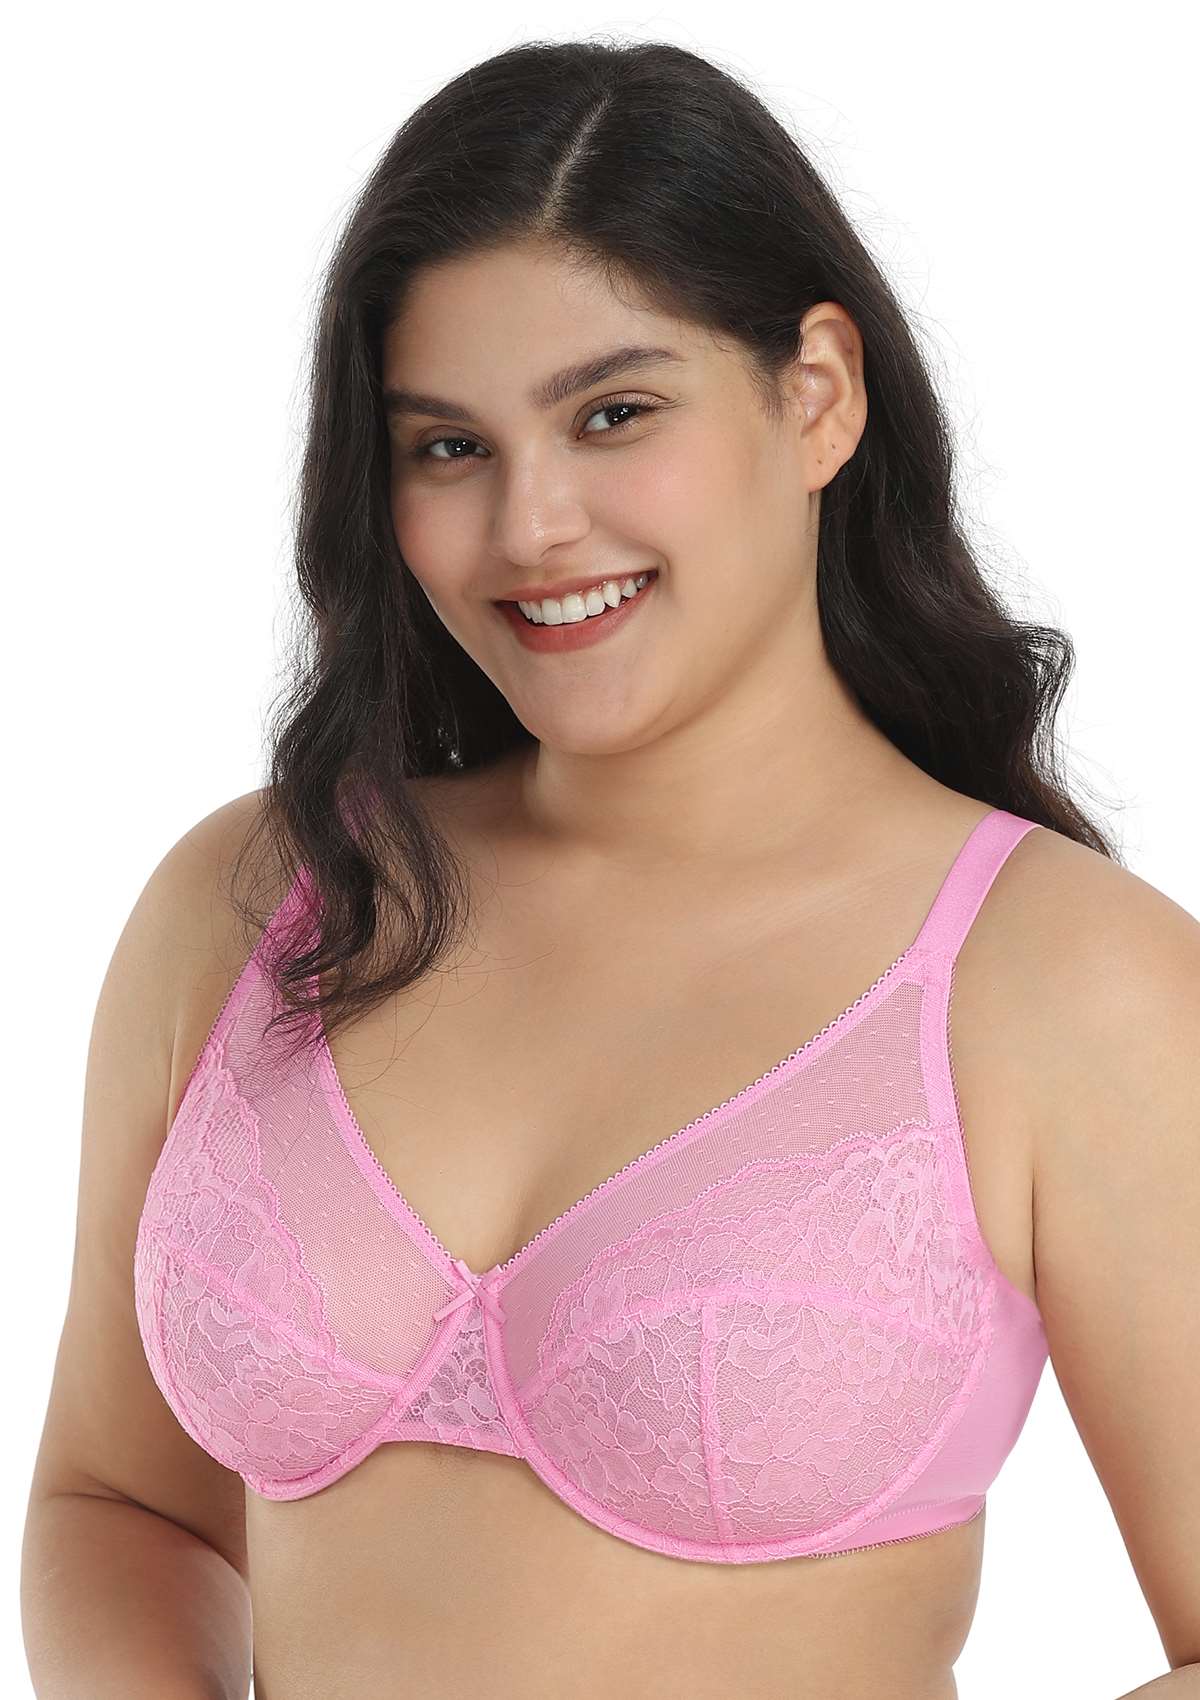 HSIA Enchante Lacy Bra: Comfy Sheer Lace Bra With Lift - Pink / 38 / G